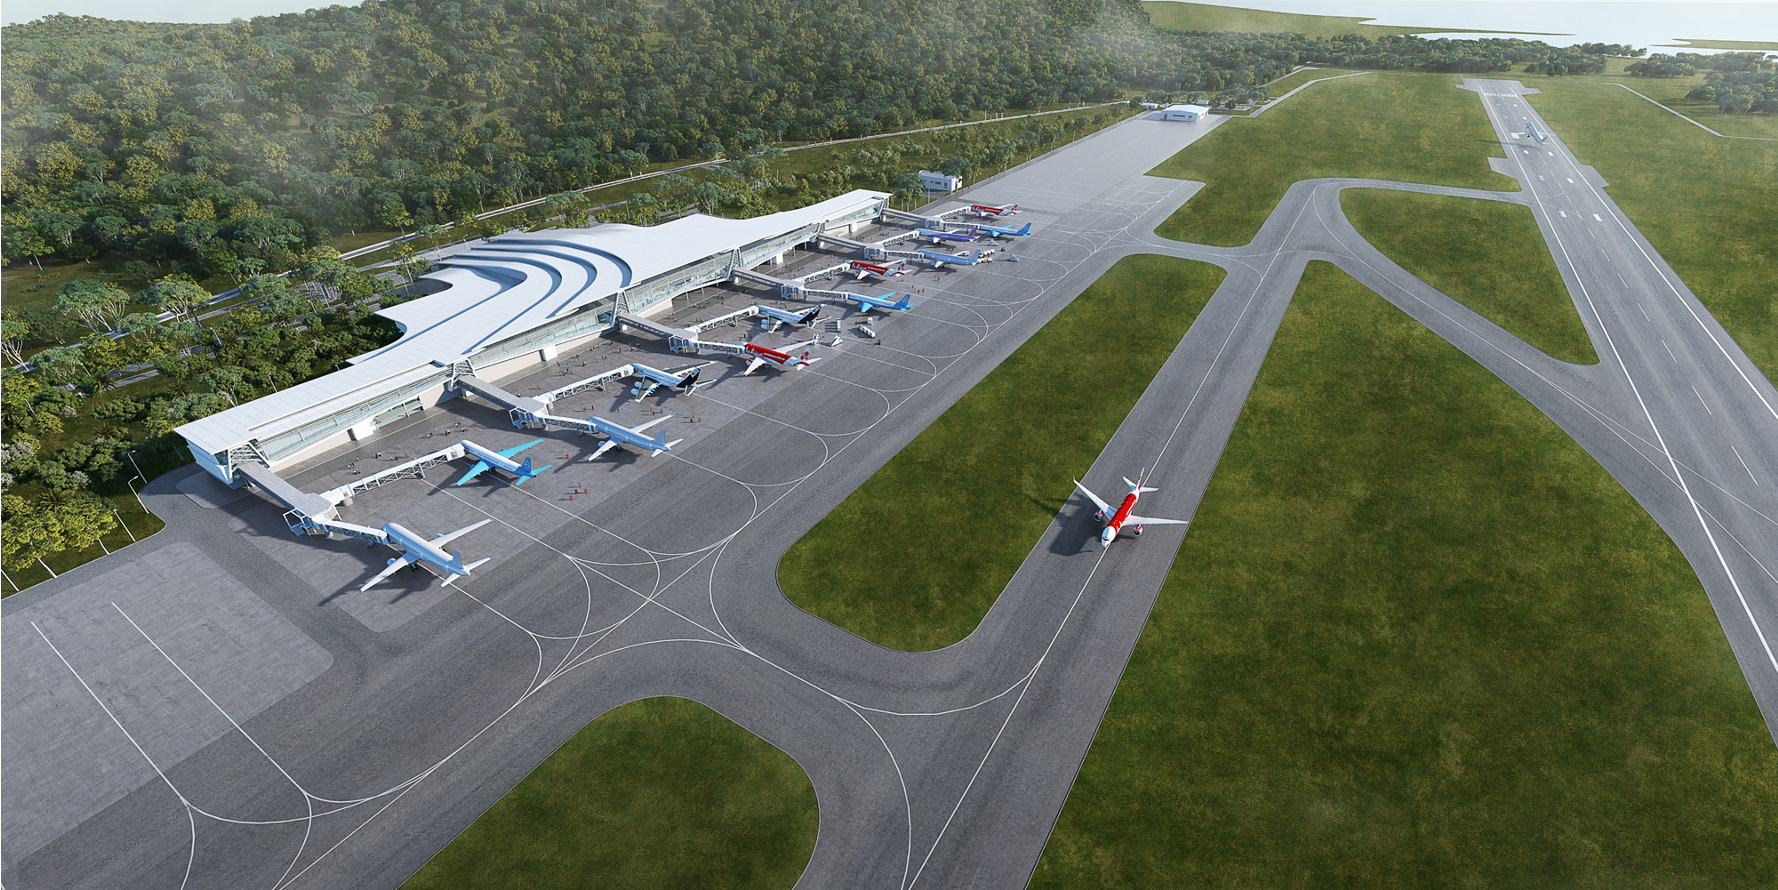 Cambodia Airports Unveils Development Plans For Sihanouk International Airport The Moodie Davitt Report The Moodie Davitt Report